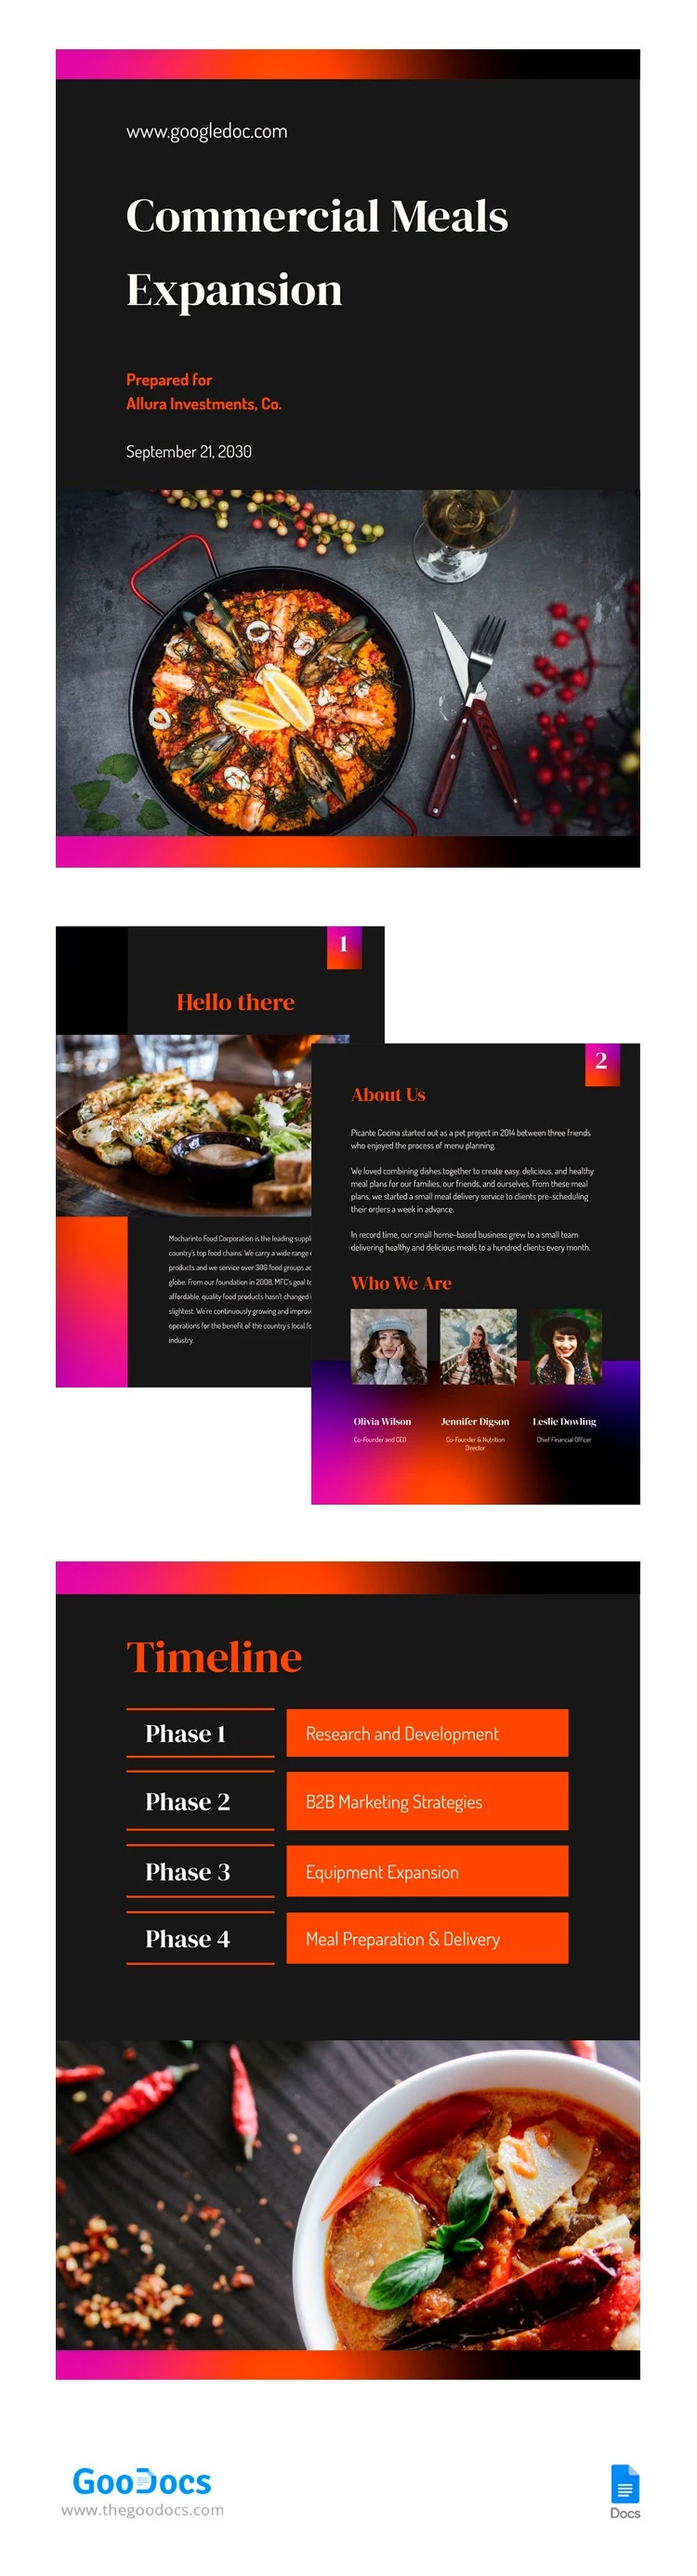 Commercial Meals Proposal - free Google Docs Template - 10062845